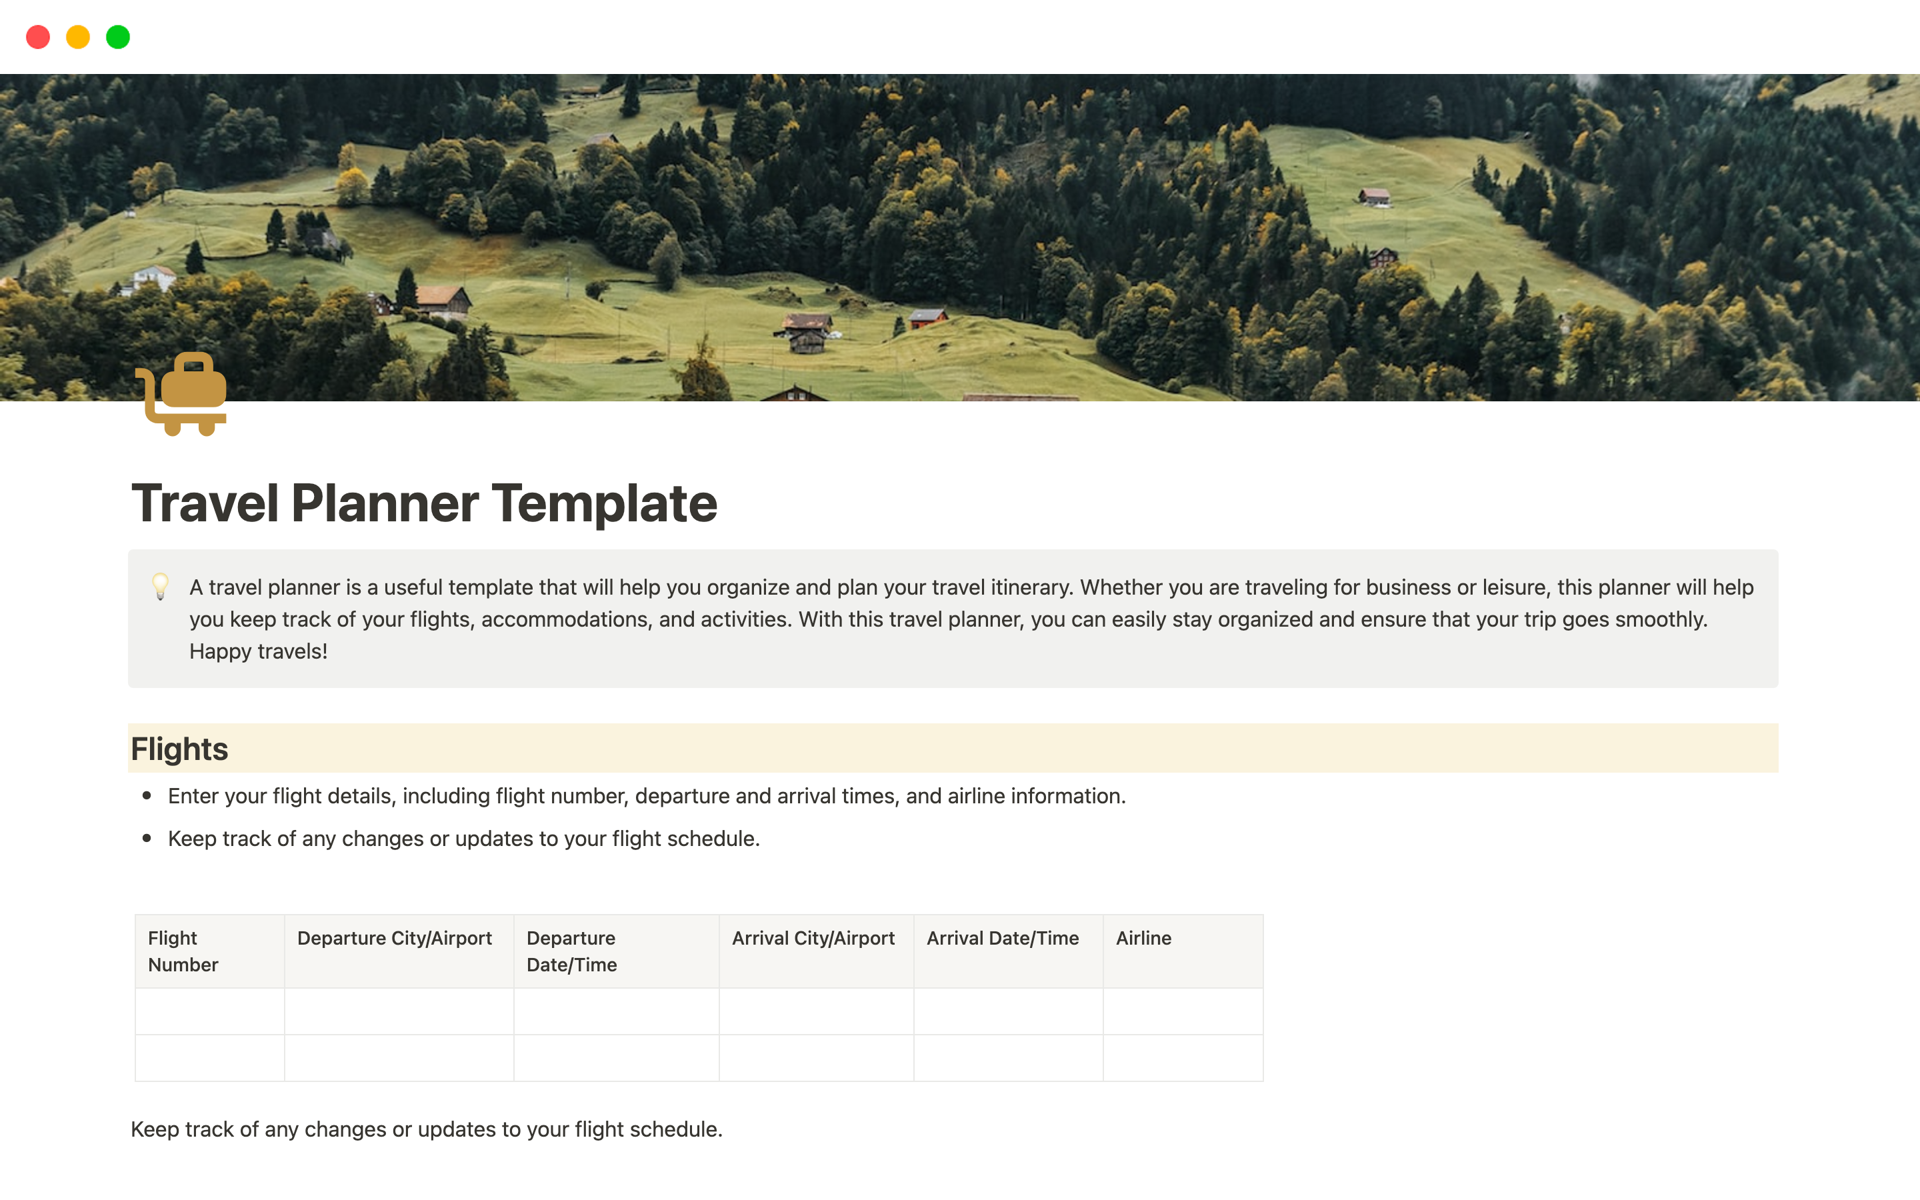 The travel planner template is a helpful tool for organizing and planning travel itineraries. 